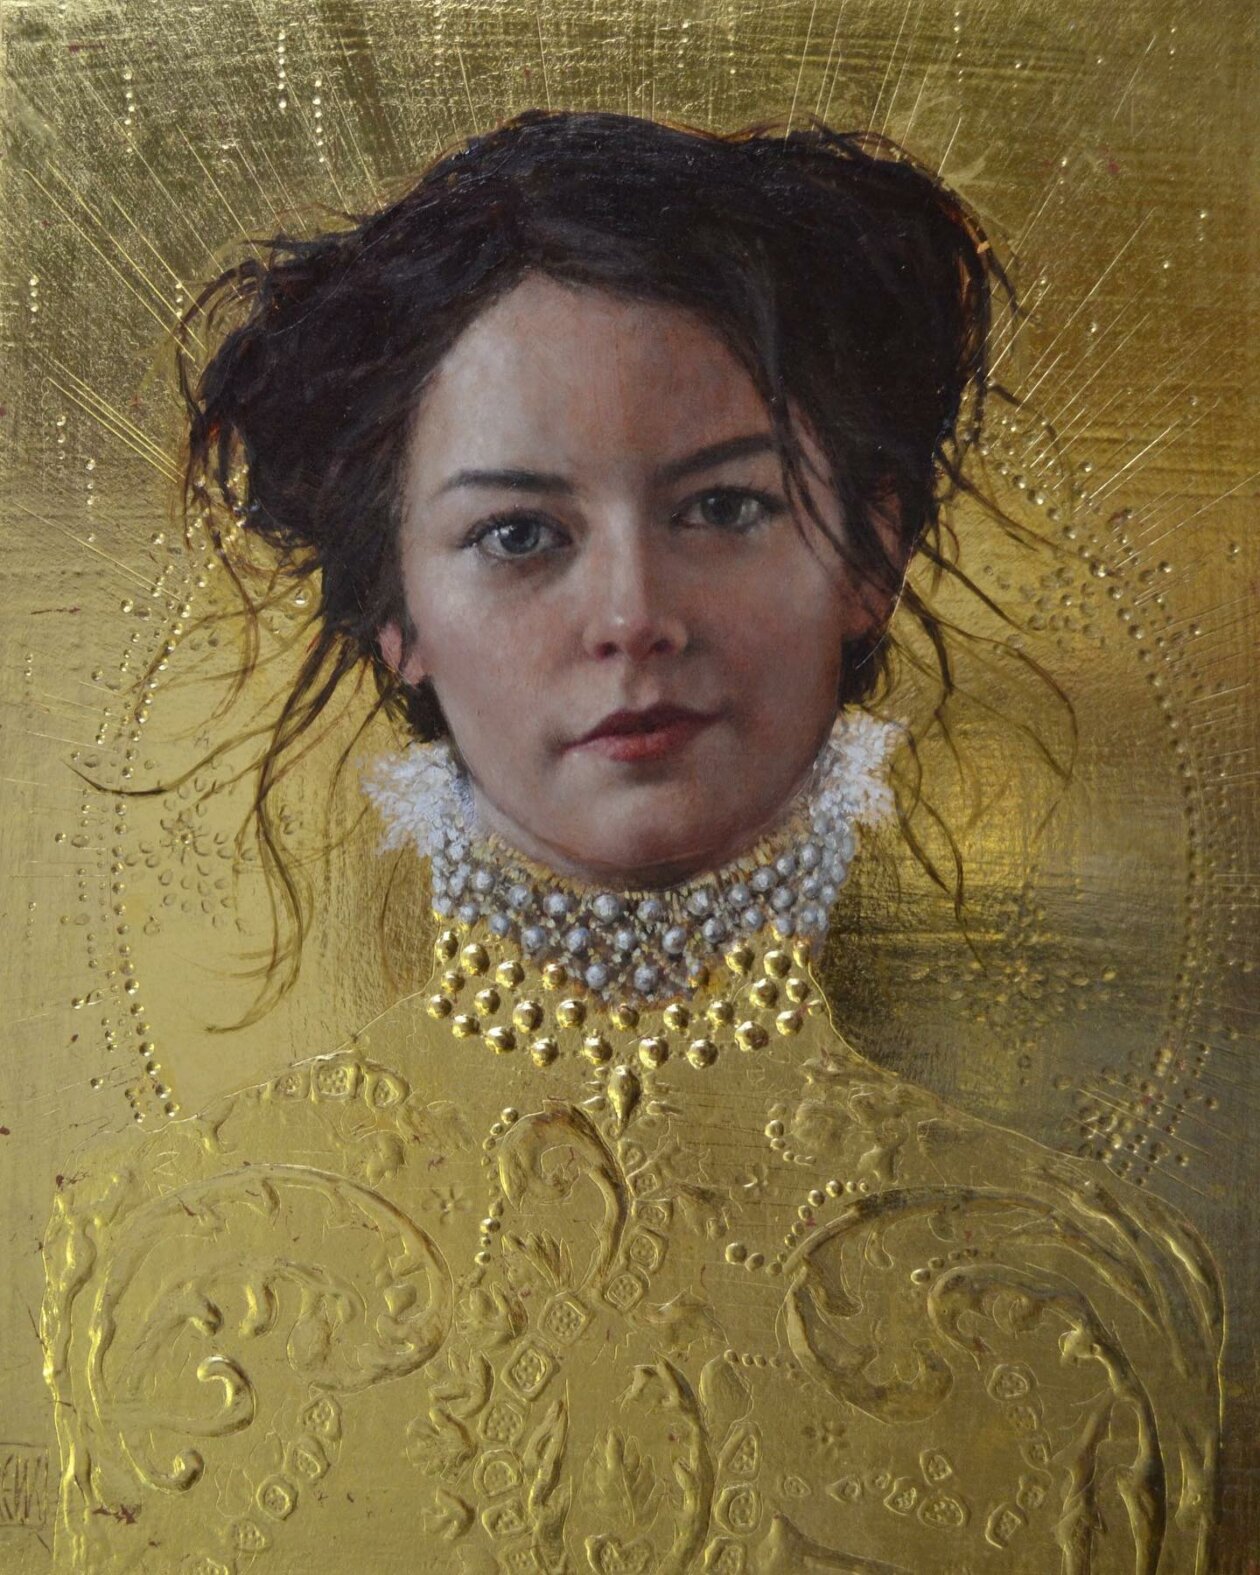 Realistic Figurative Paintings With Gold Ornaments By Stephanie Rew (5)